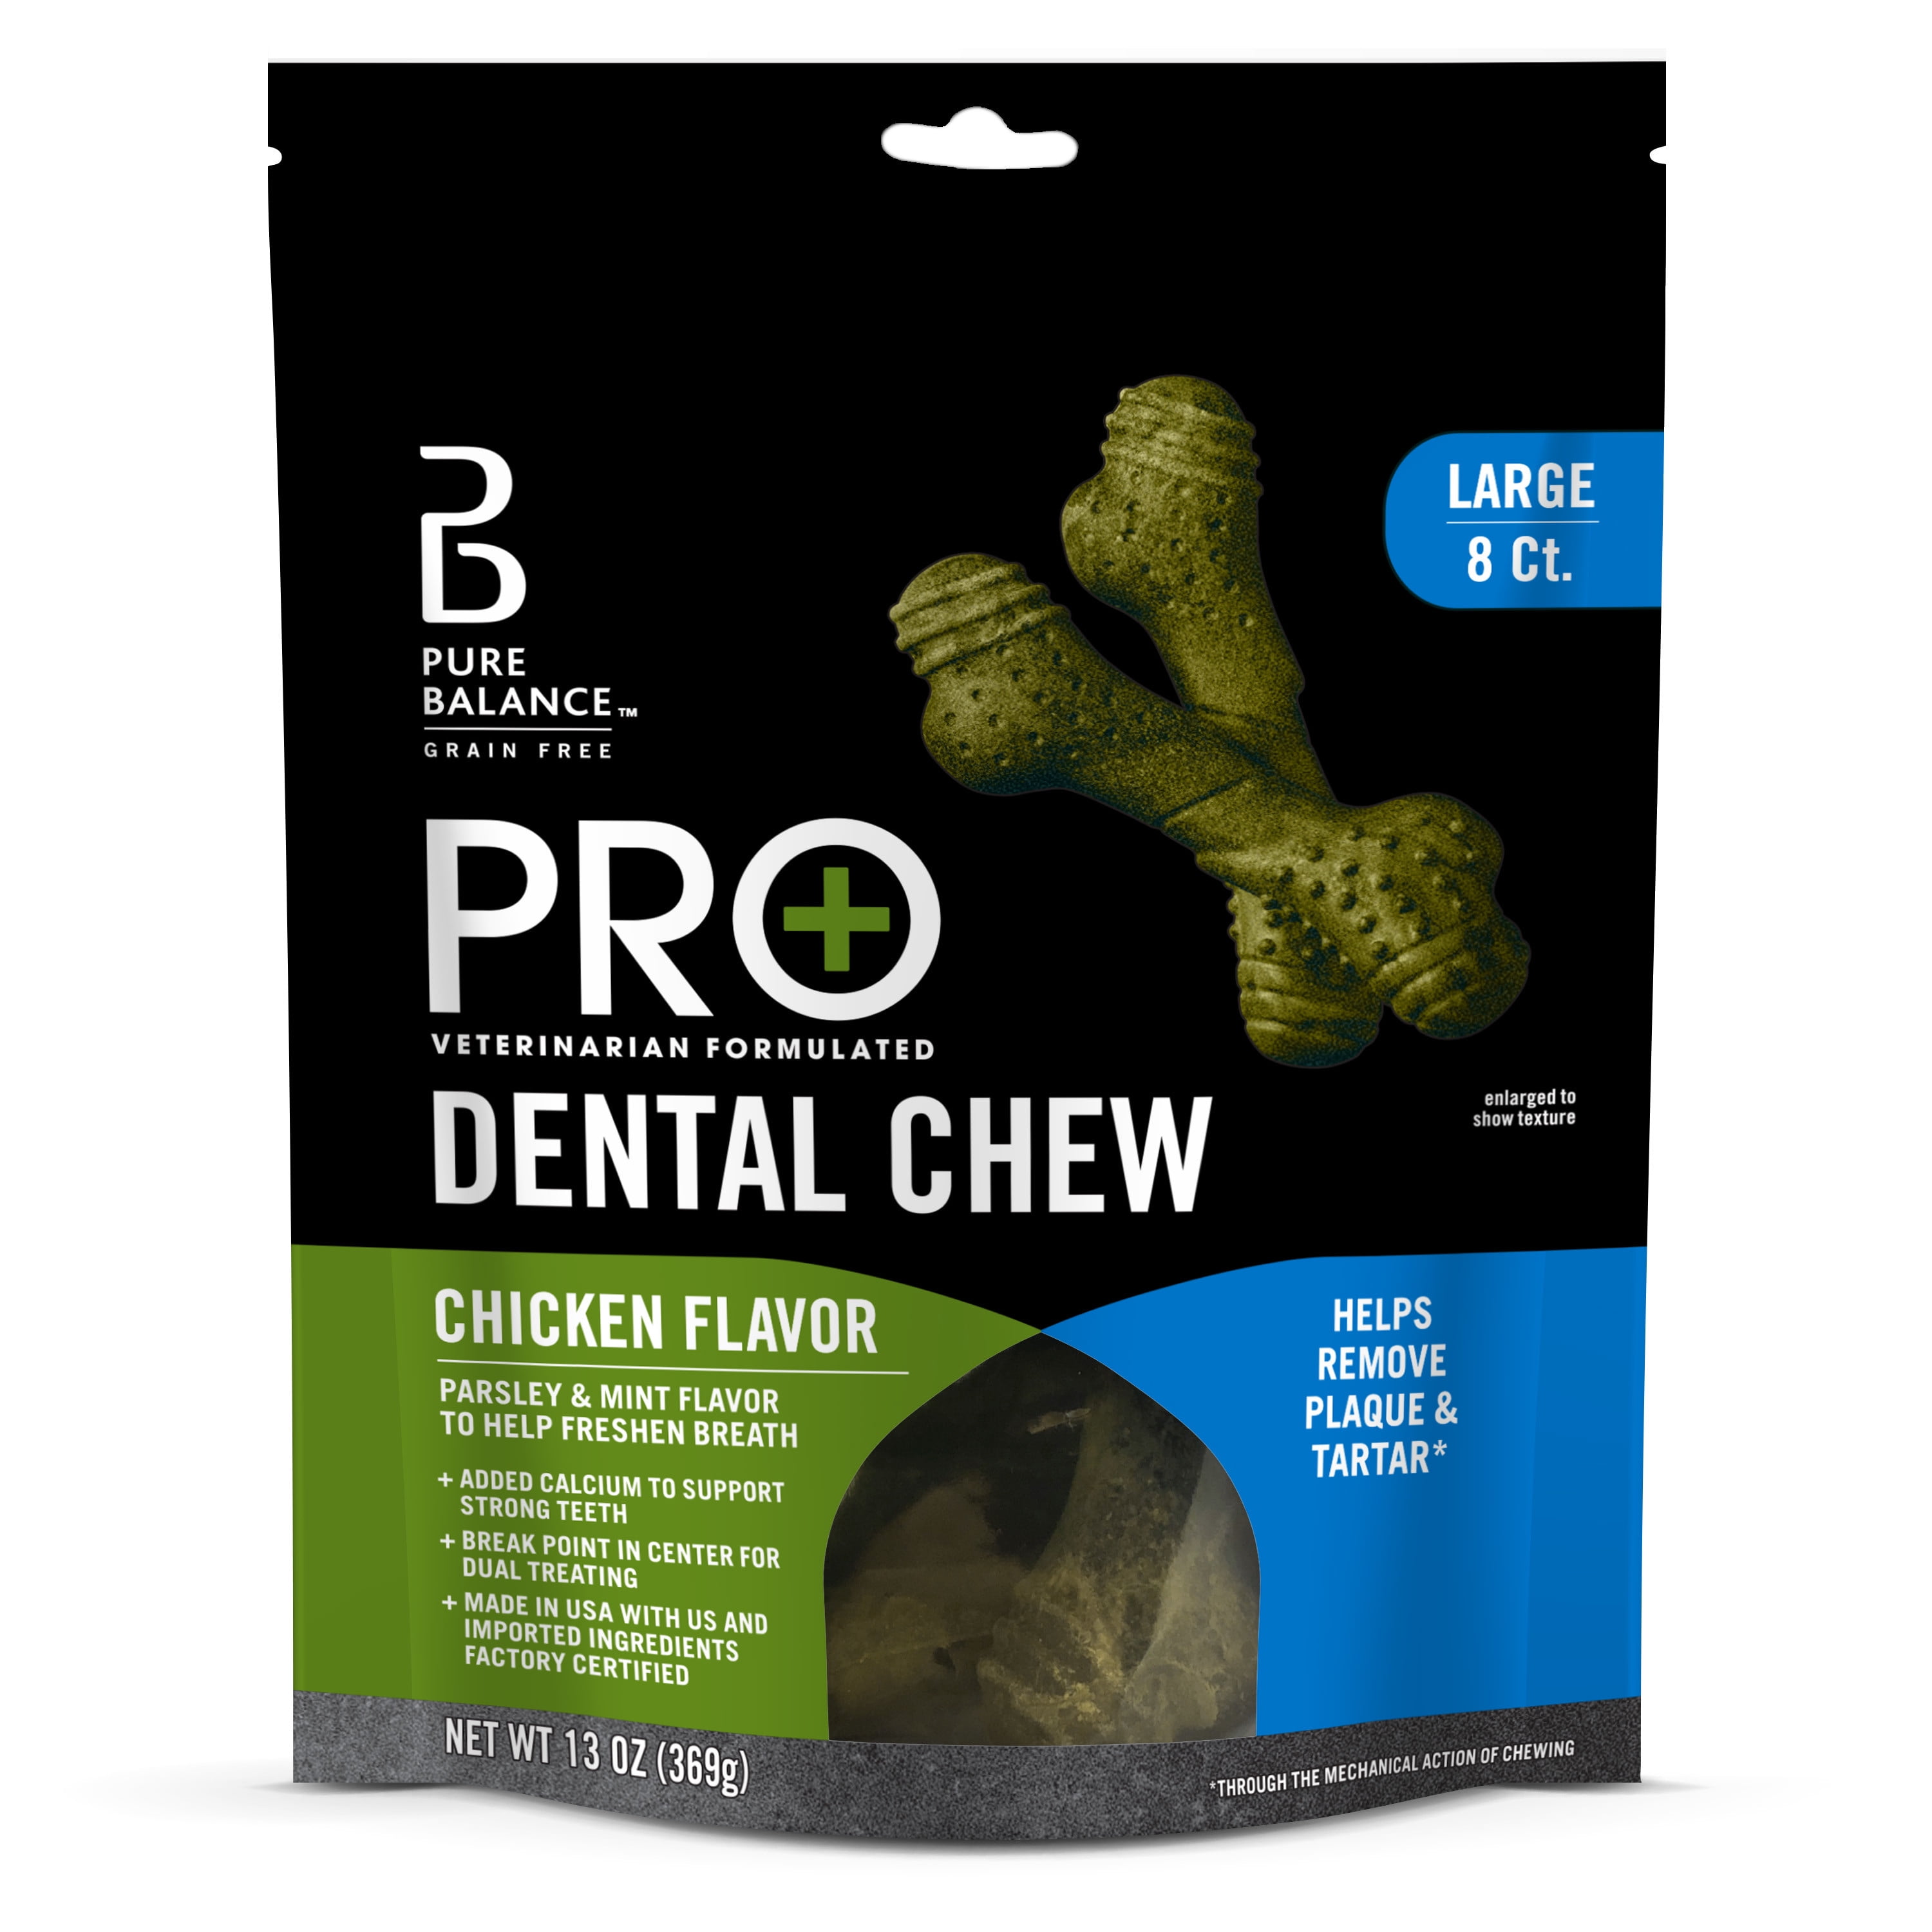 Pure Balance Pro+ Dental Chews for Dogs, Chicken Flavor, 8 Count, Large